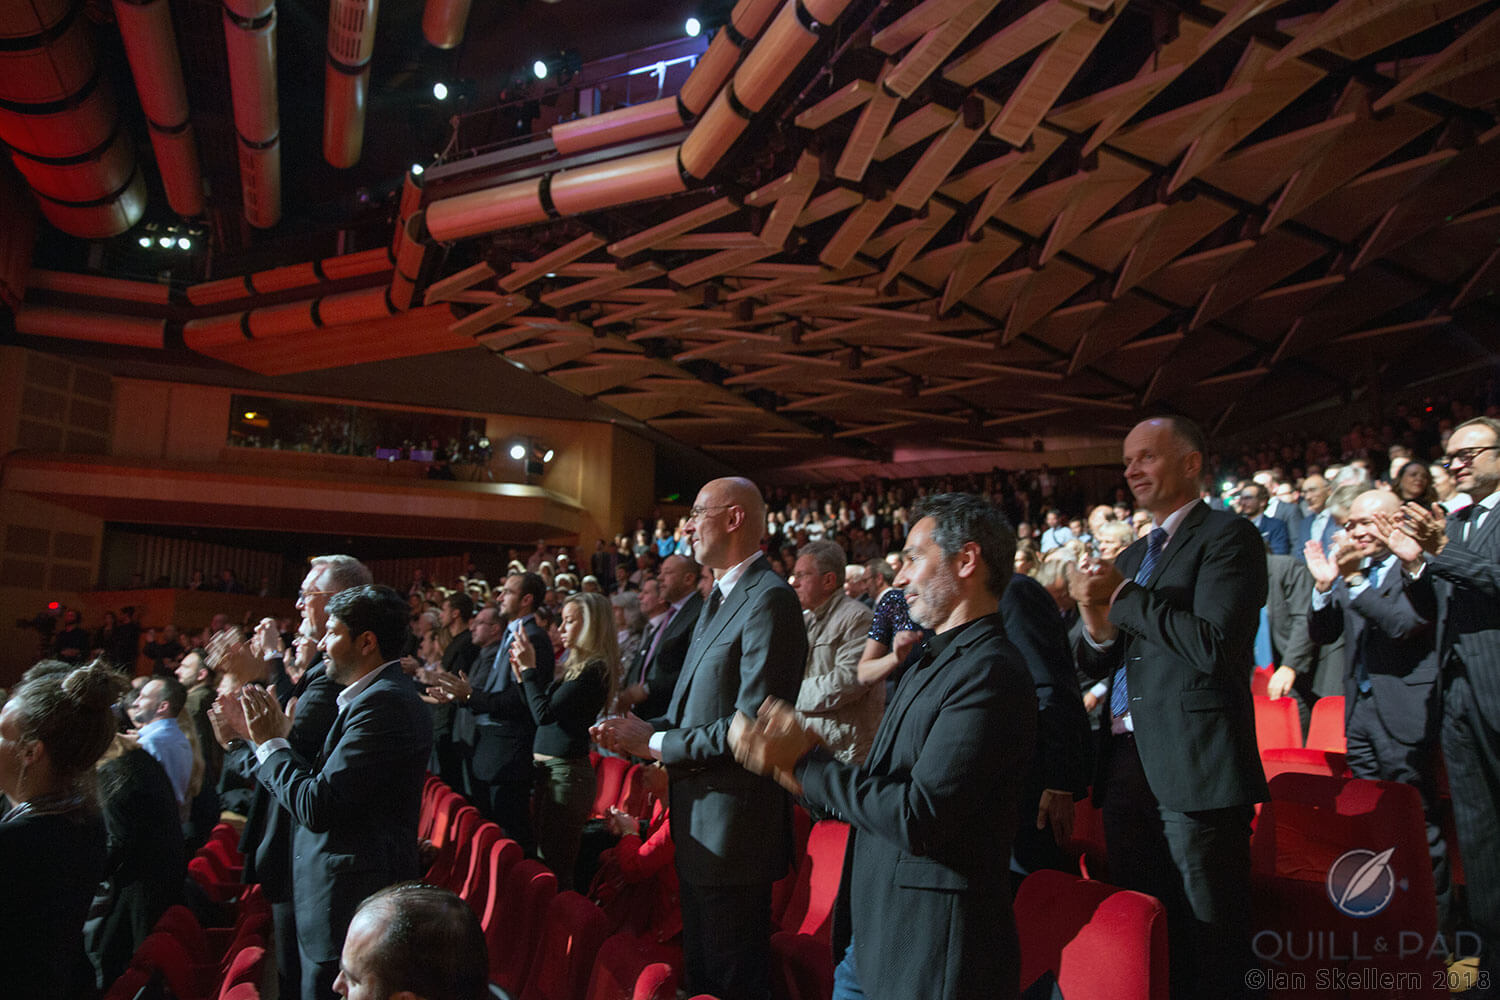 A prolonged standing ovation for Jean-Claude Biver at the 2018 GPHG